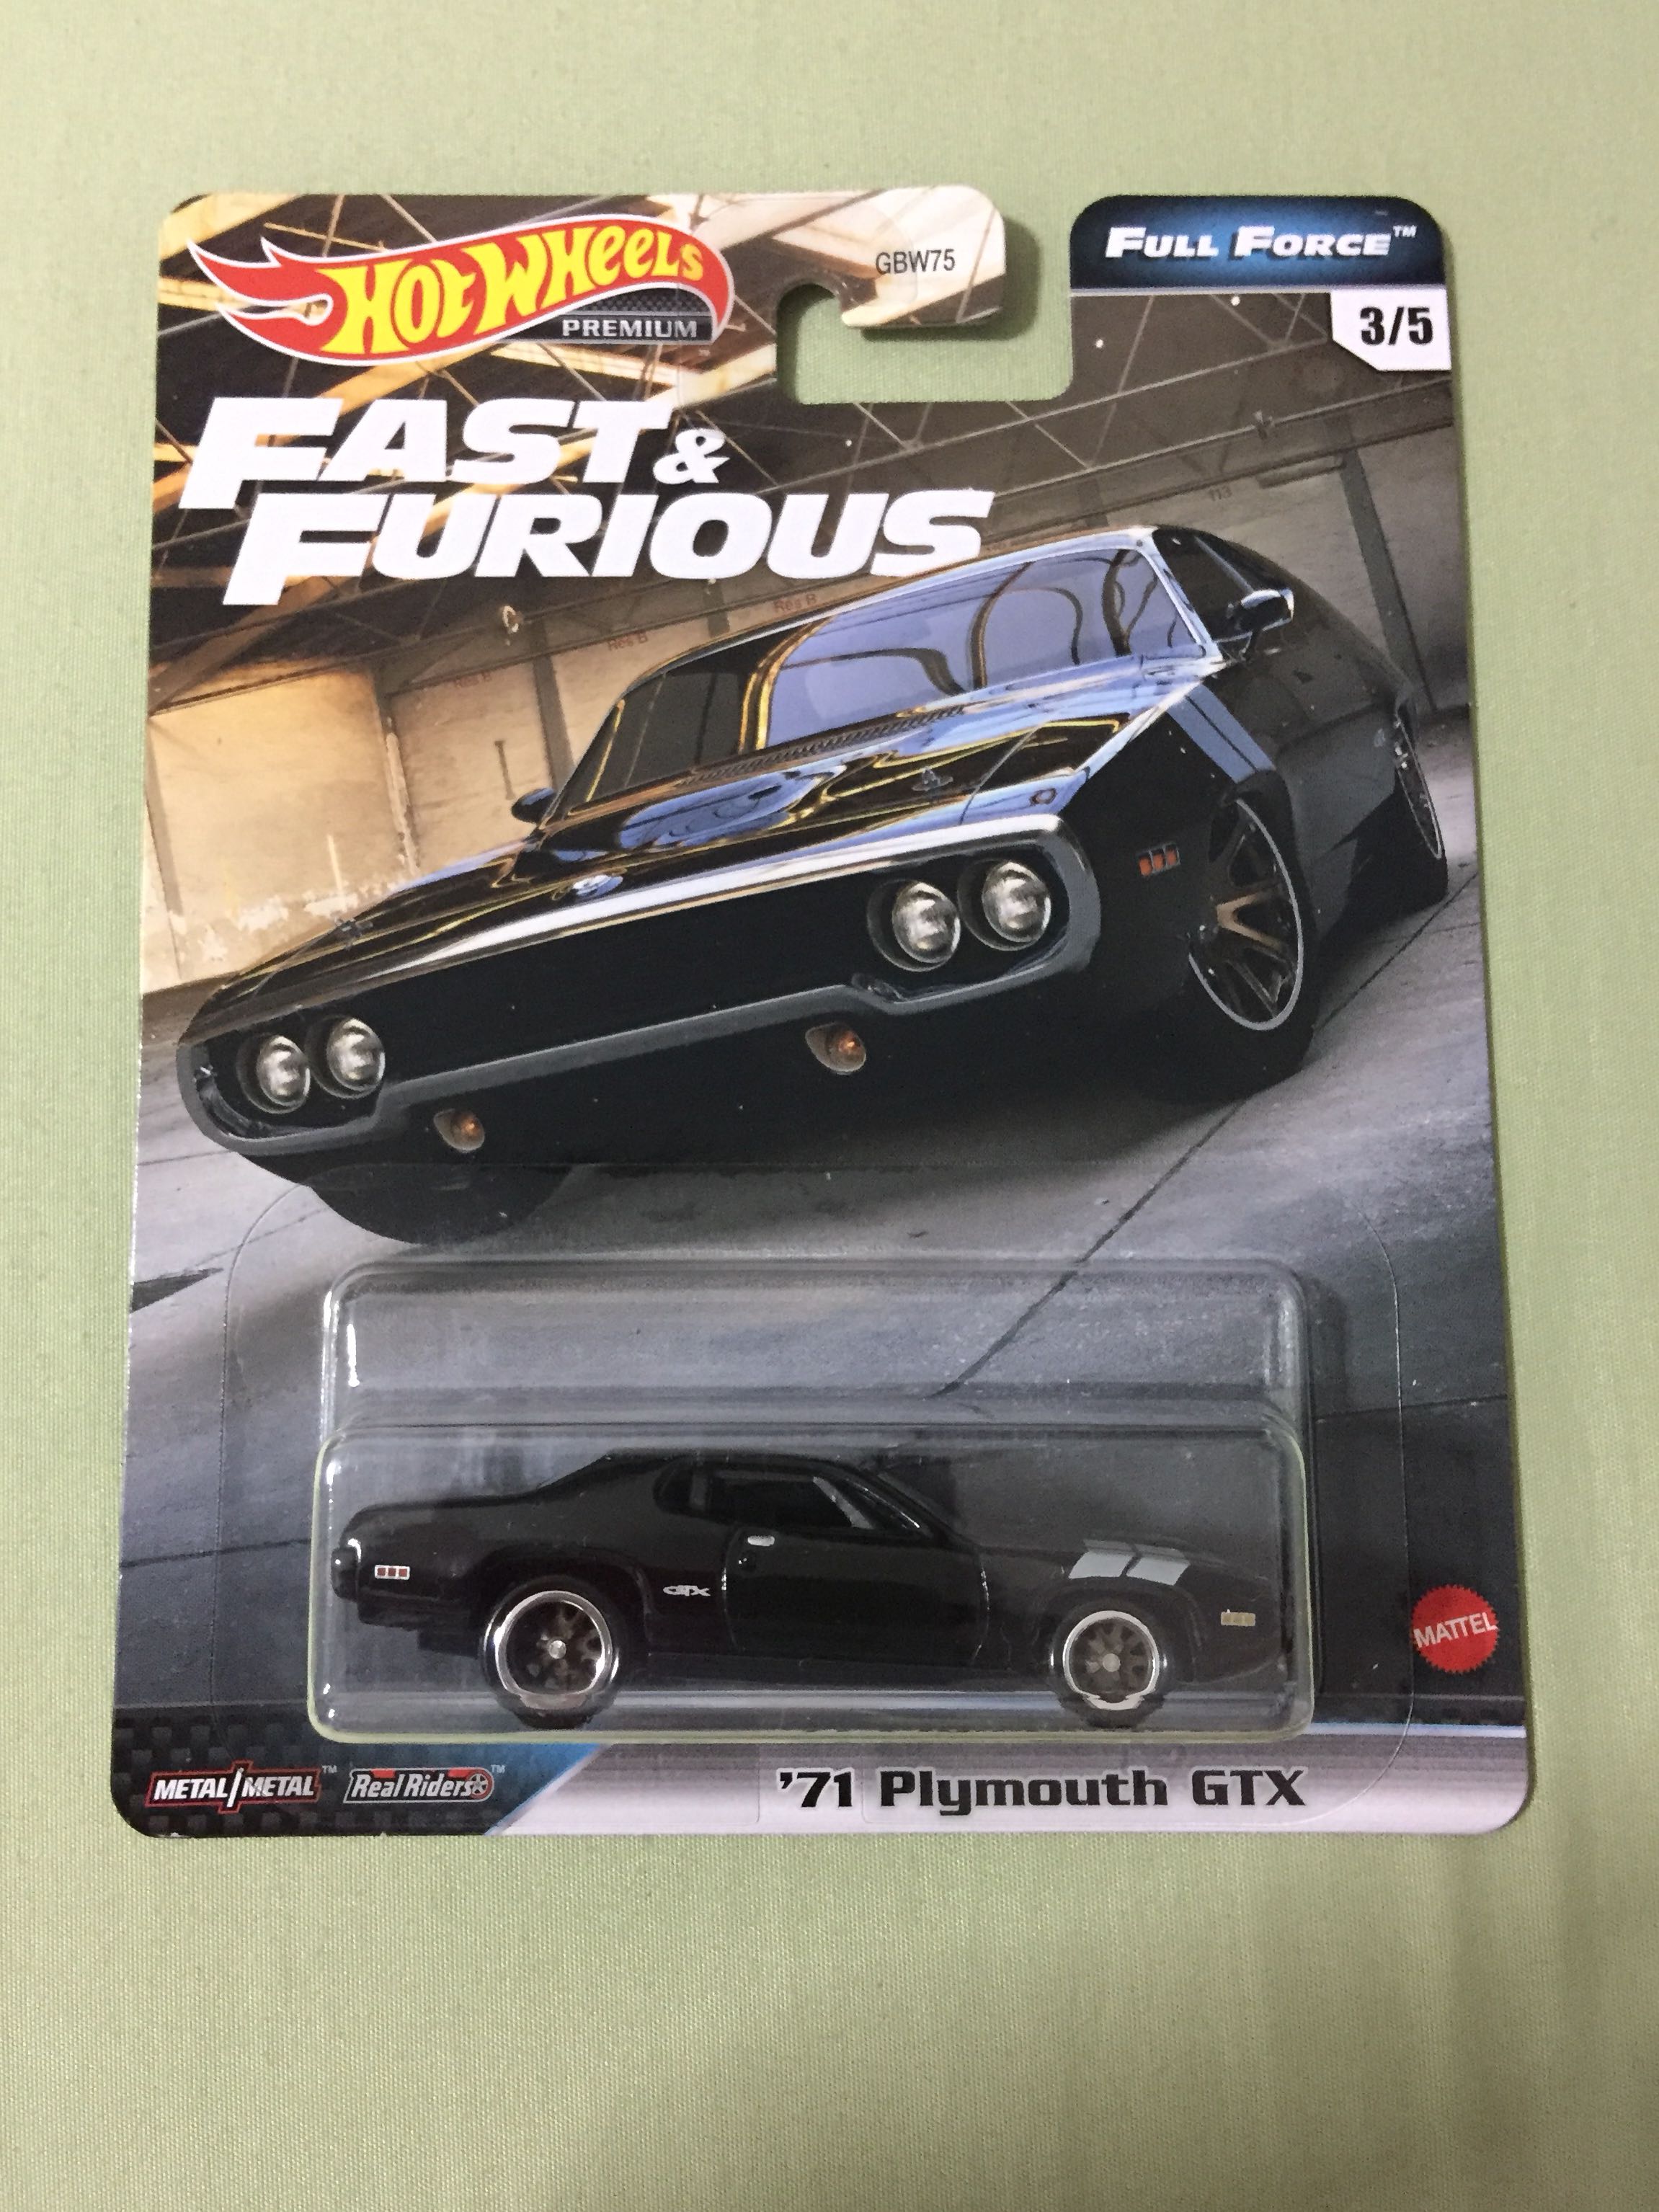 HOT WHEELS PREMIUM FAST & FURIOUS FULL FORCE '71 PLYMOUTH GTX w/REAL RIDERS